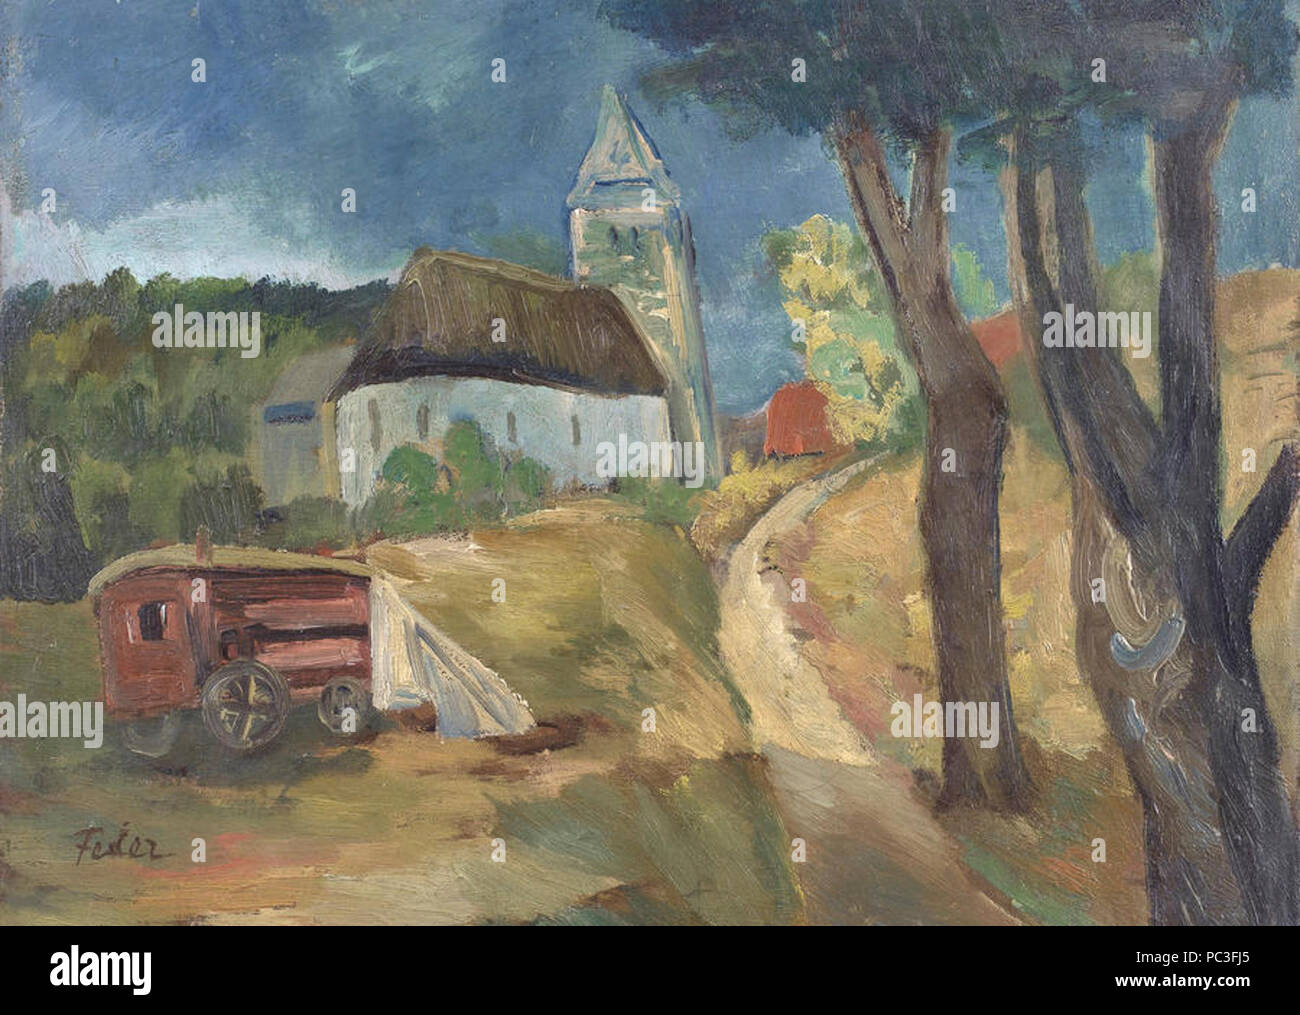 Adolphe Feder Village landscape with carriage. Stock Photo